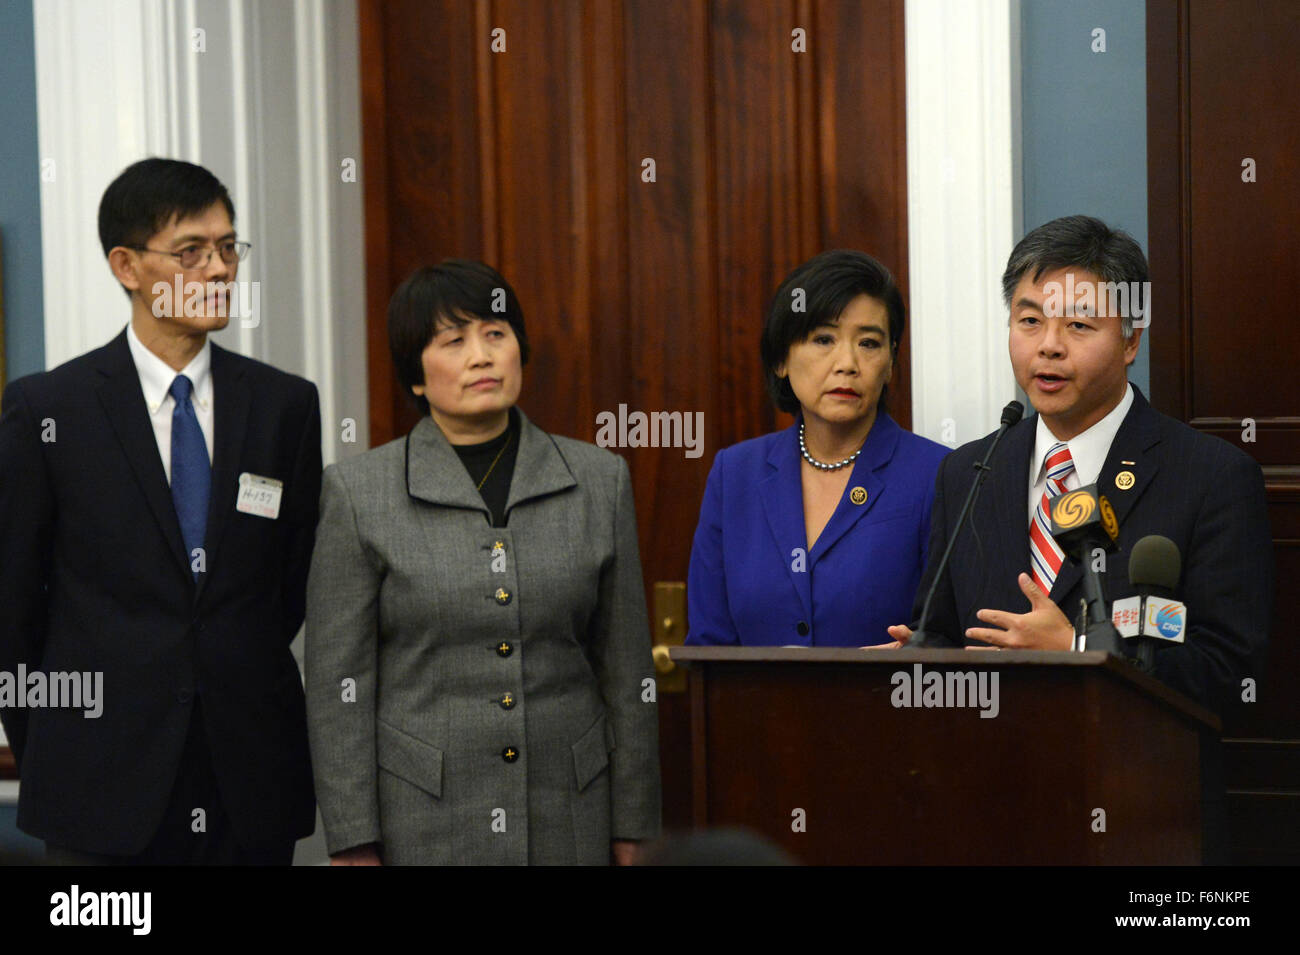 Washington DC, USA. 17th Nov, 2015. (L-R) Temple University professor Xiaoxing Xi, National Weather Service hydrologist Sherry Chen, lawmakers Judy Chu and Ted Lieu attend a press conference in Washington, DC, the United States, Nov. 17, 2015. Four U.S. lawmakers on Tuesday urged the country's Department of Justice (DOJ) to investigate whether race, ethnicity or national origin played a part in the recent cases against Chinese-American scientists who were wrongfully suspected of economic espionage. Credit:  Yin Bogu/Xinhua/Alamy Live News Stock Photo